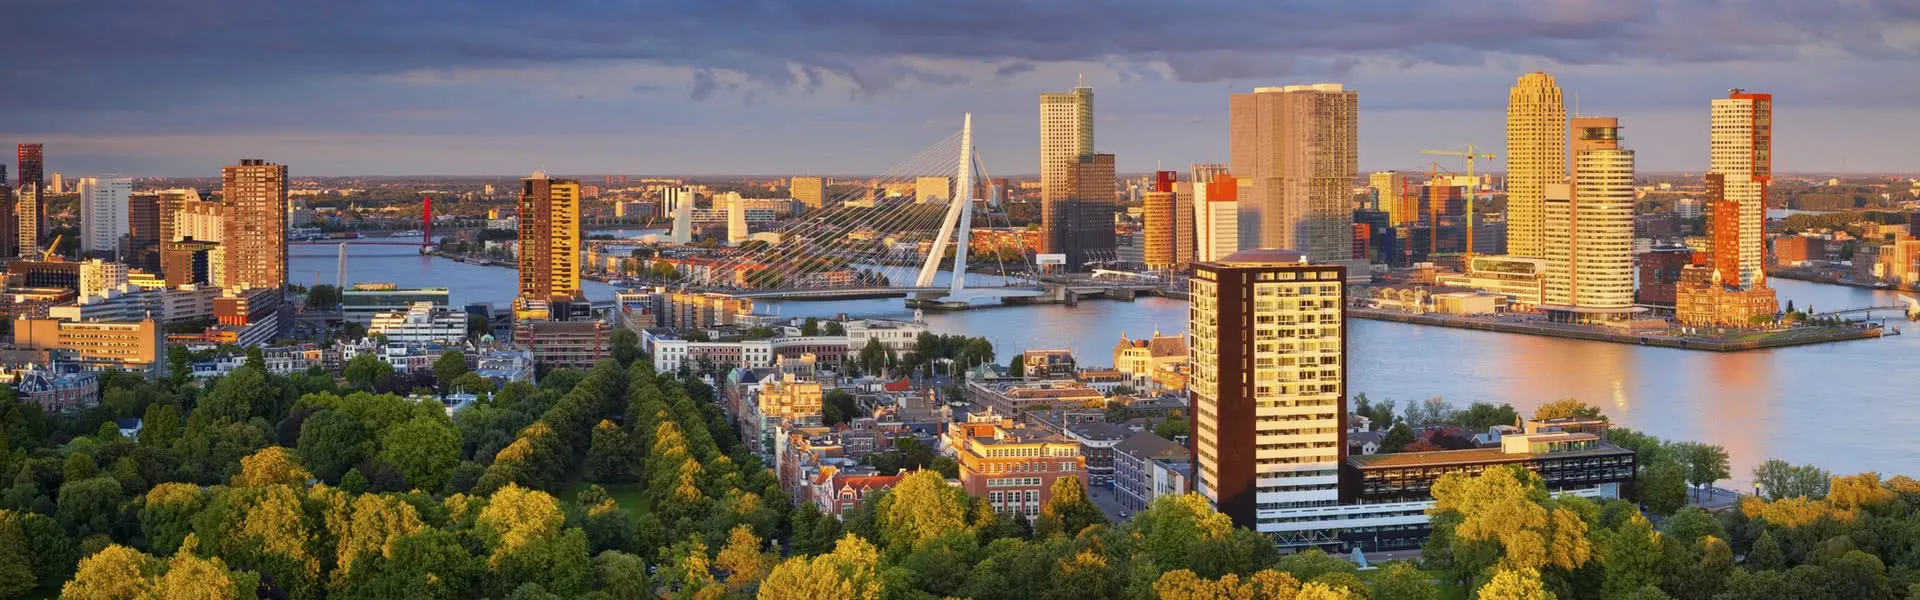 Rotterdam - the destination with youth hostels